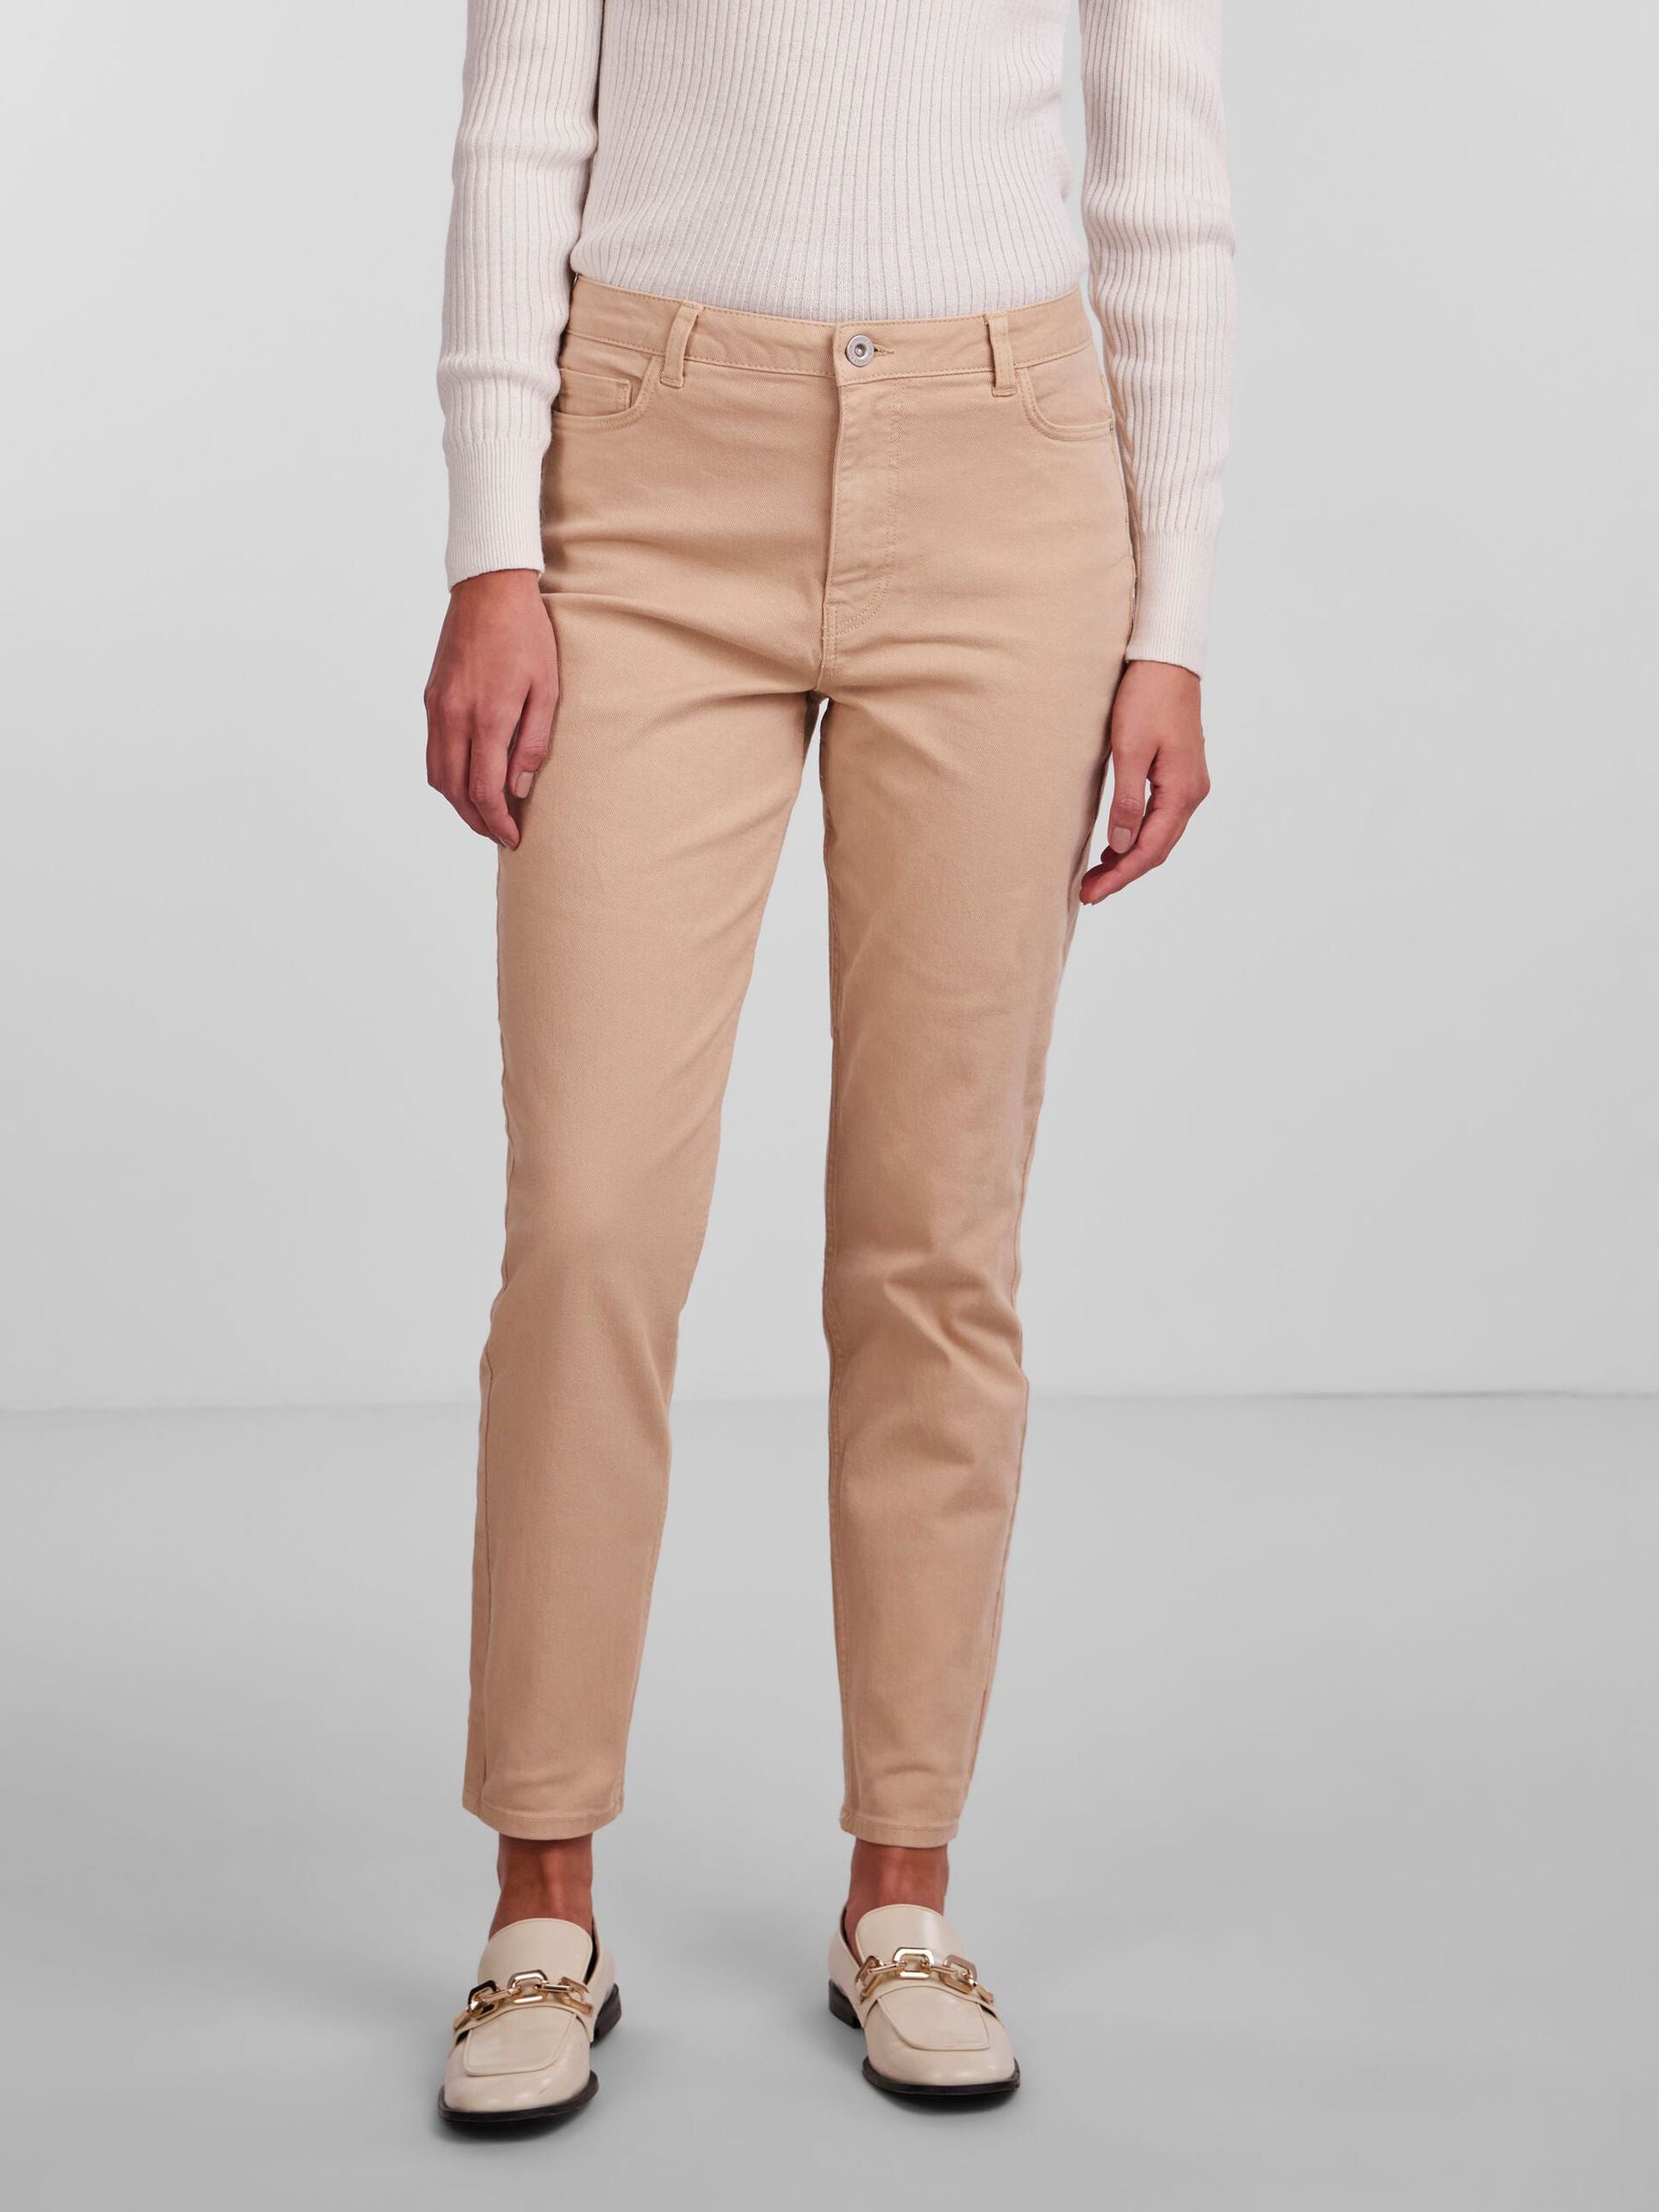 Pieces beige trousers